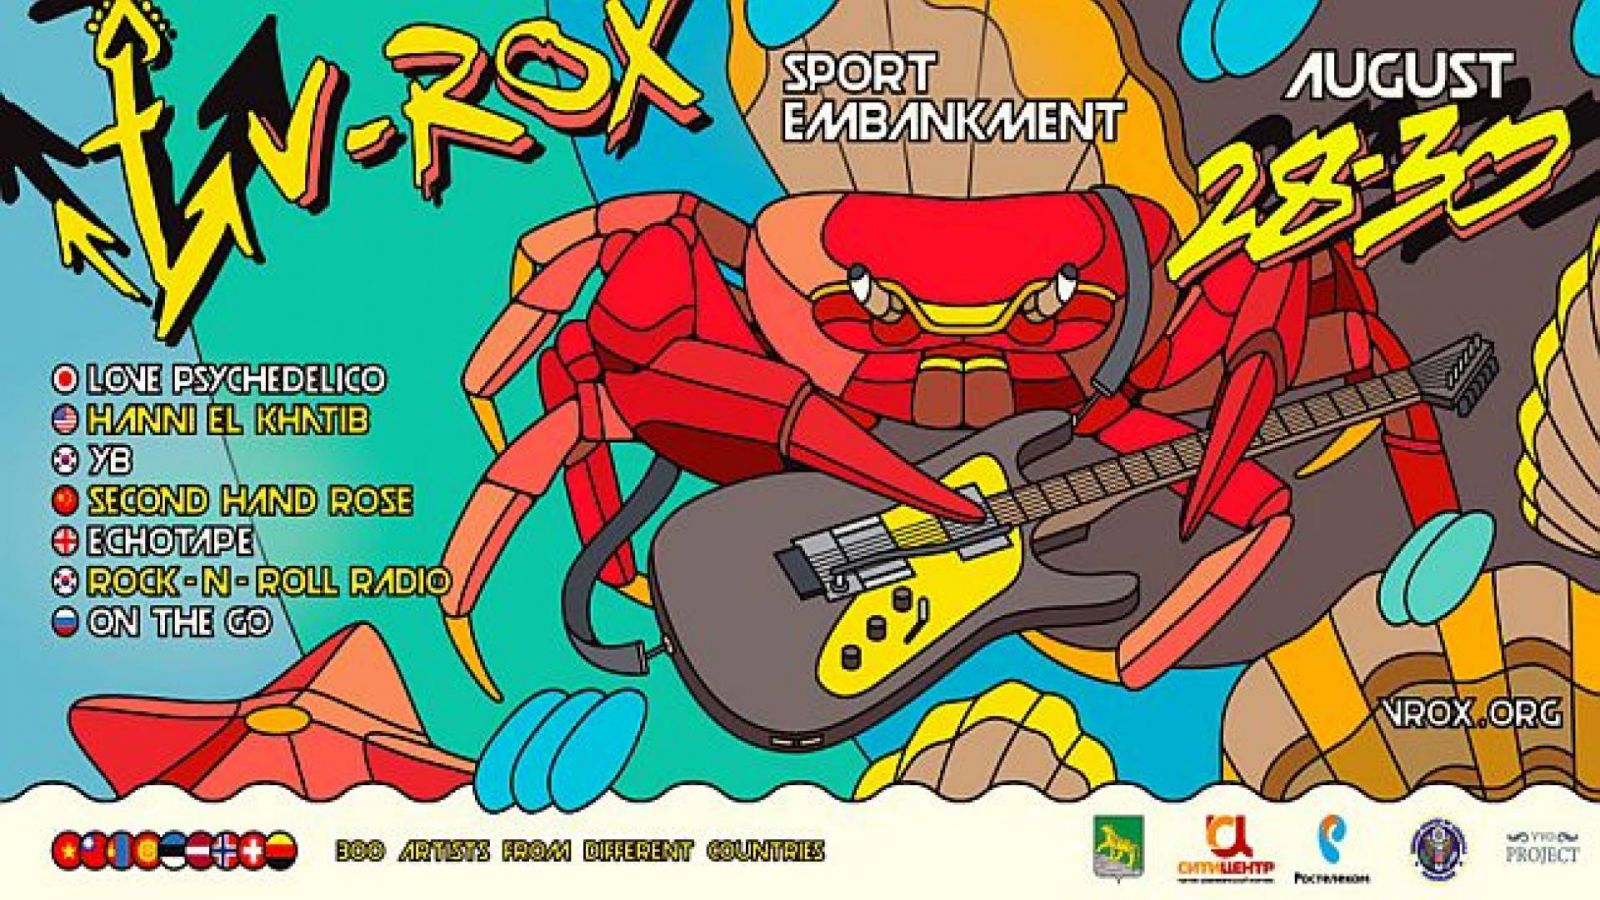 Korean bands to gig at V-ROX, in Russia © V-ROX Festival